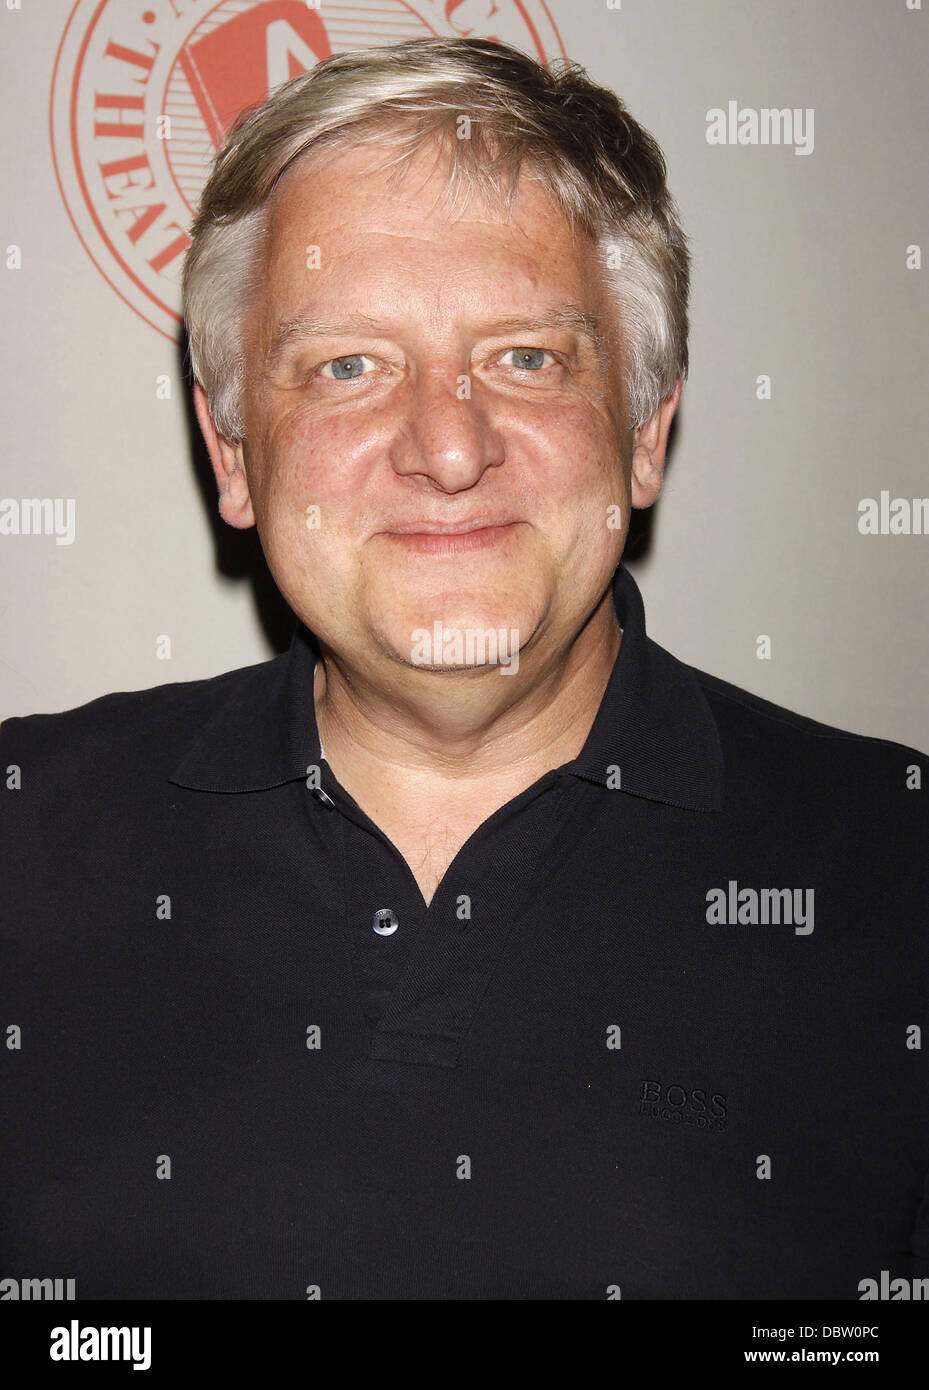 Simon Russell Beale Opening night after party for the Atlantic Theater Company production of 'Bluebird' held at Jake's Saloon New York City, USA - 22.08.11 Stock Photo